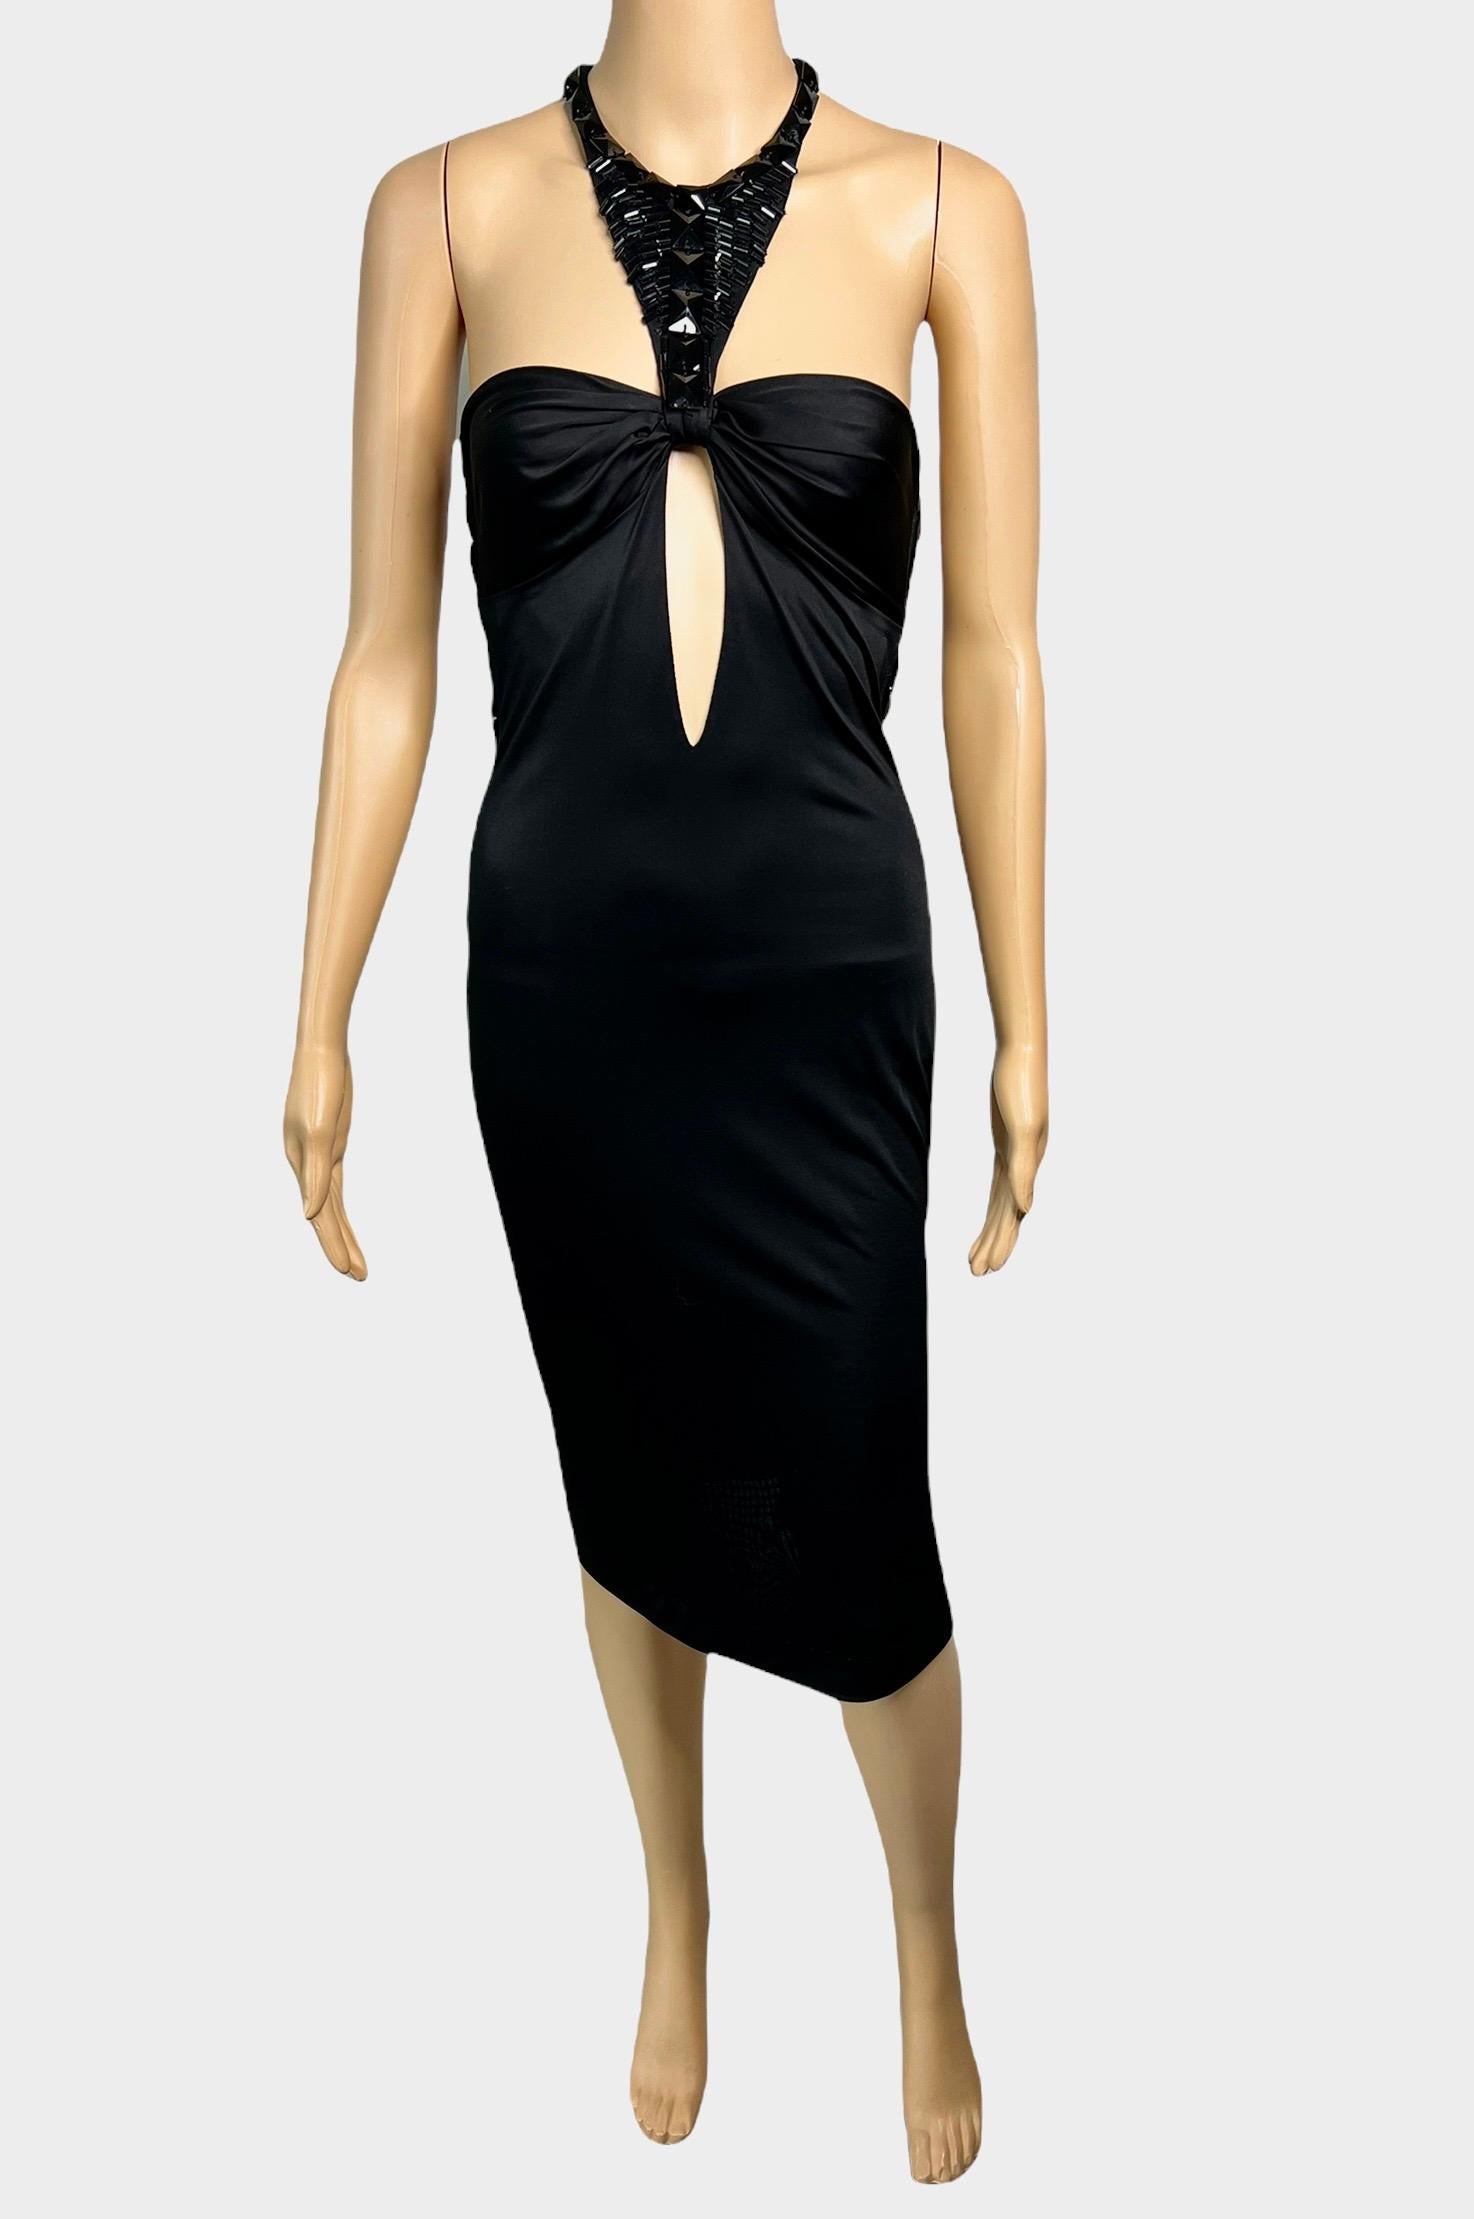 Tom Ford for Gucci F/W 2004 Embellished Plunging Cutout Black Evening Dress  For Sale 6